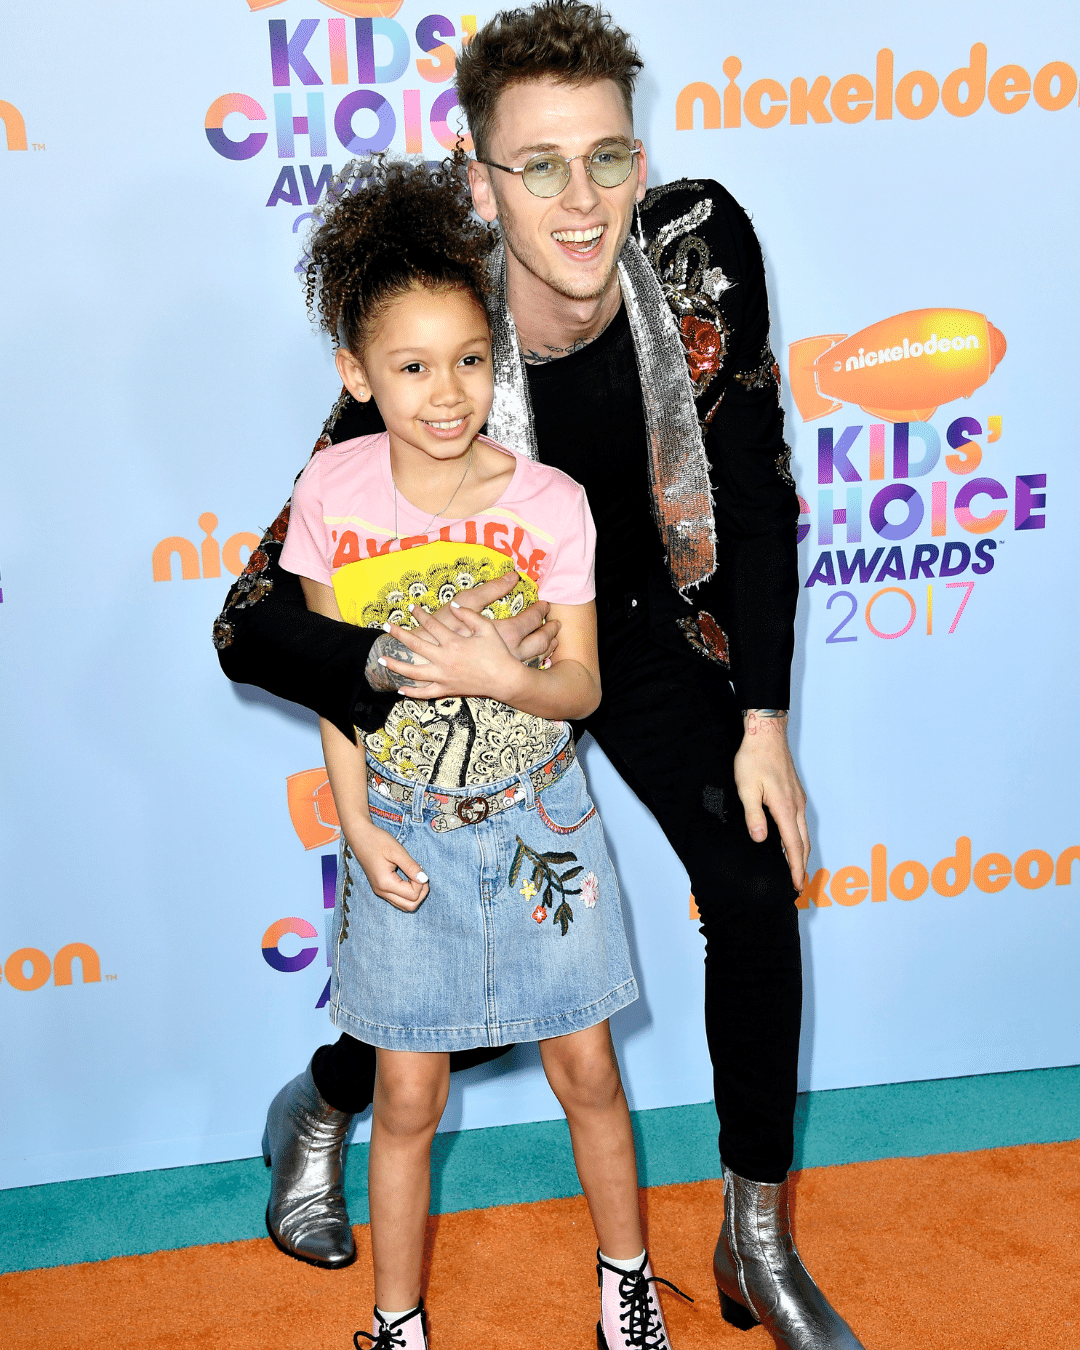 Machine gun kelly and casie colson baker at the 2017 kids choice awards